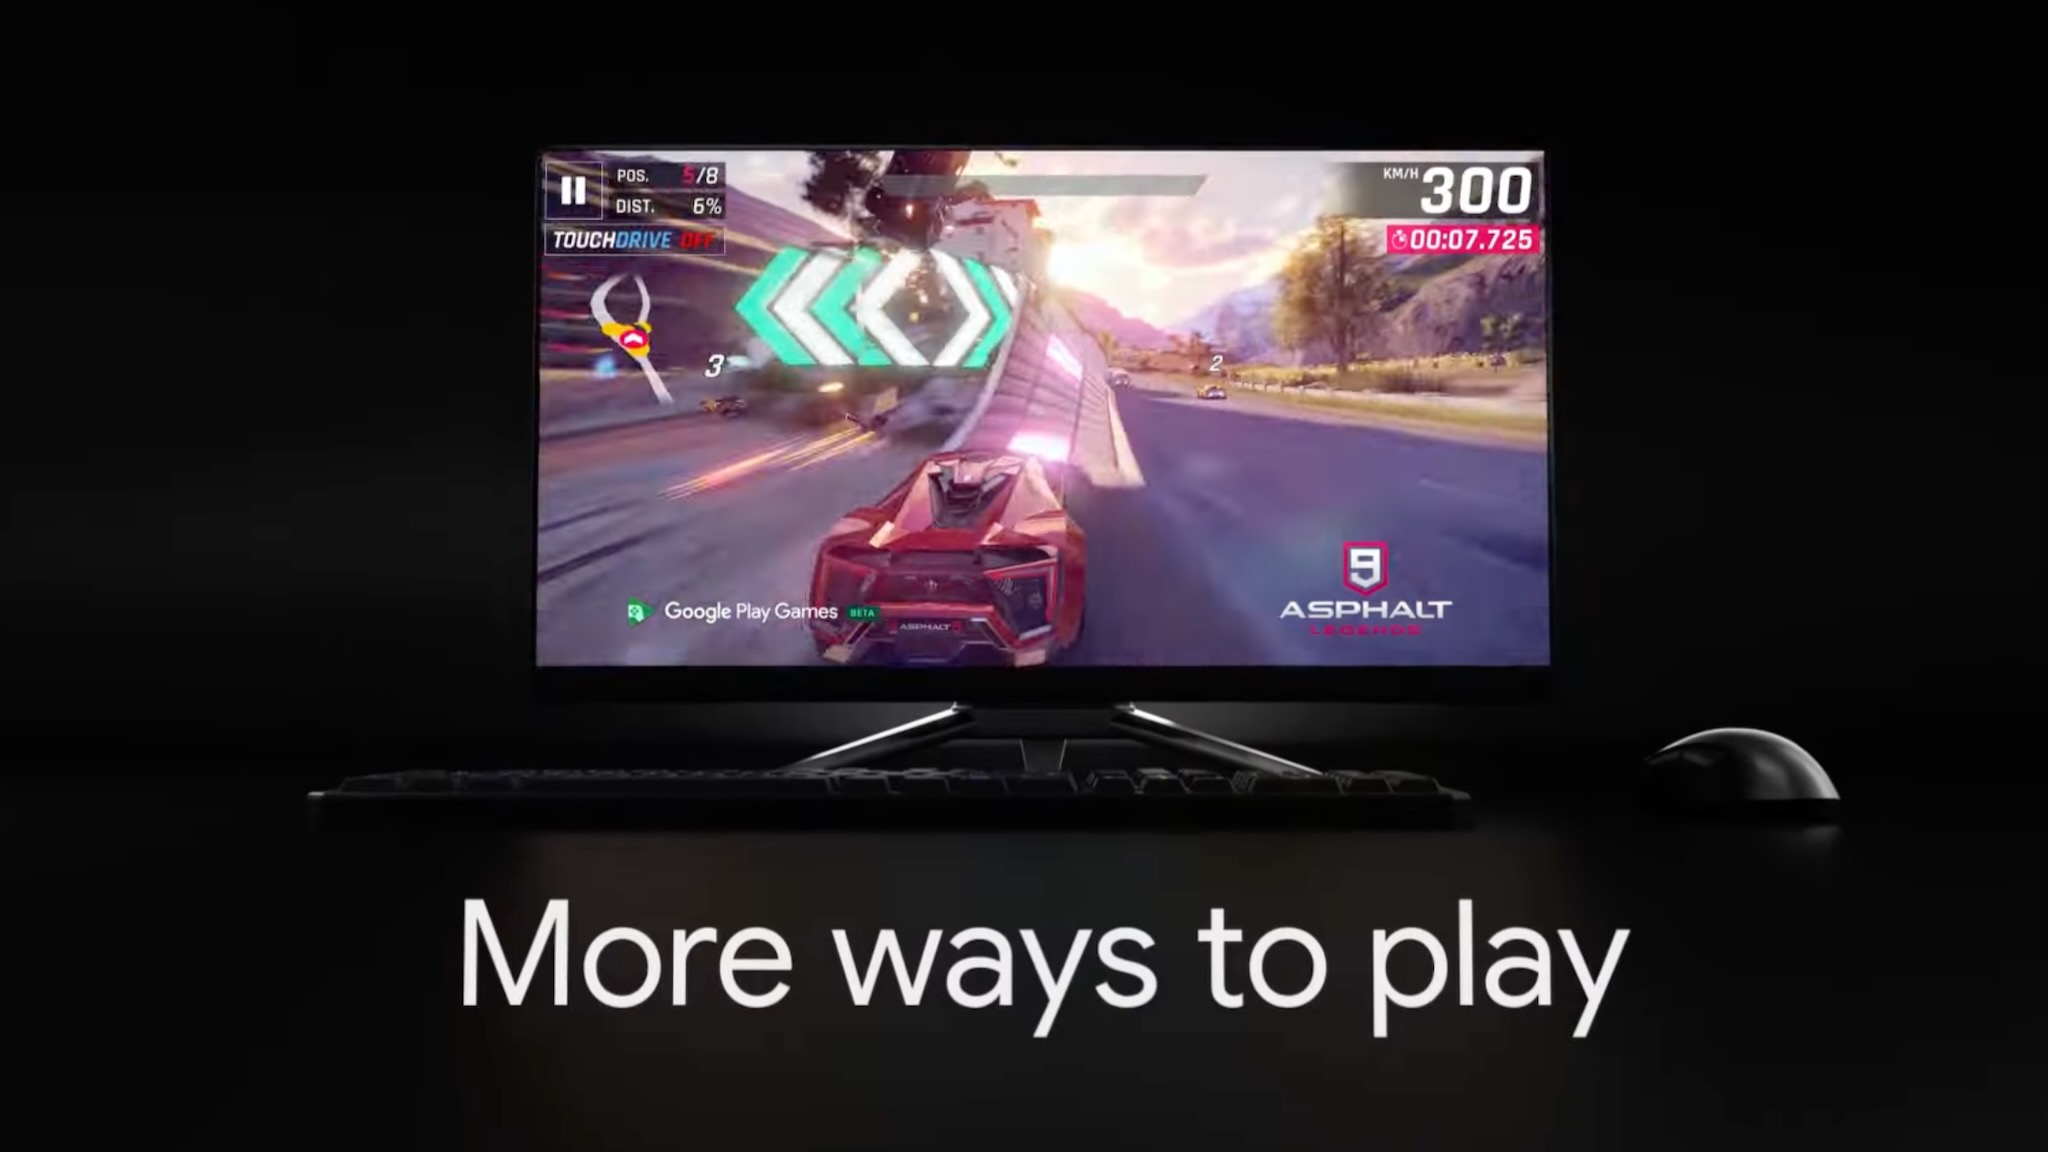 Android Developers Blog: Google Play Games on PC brings new